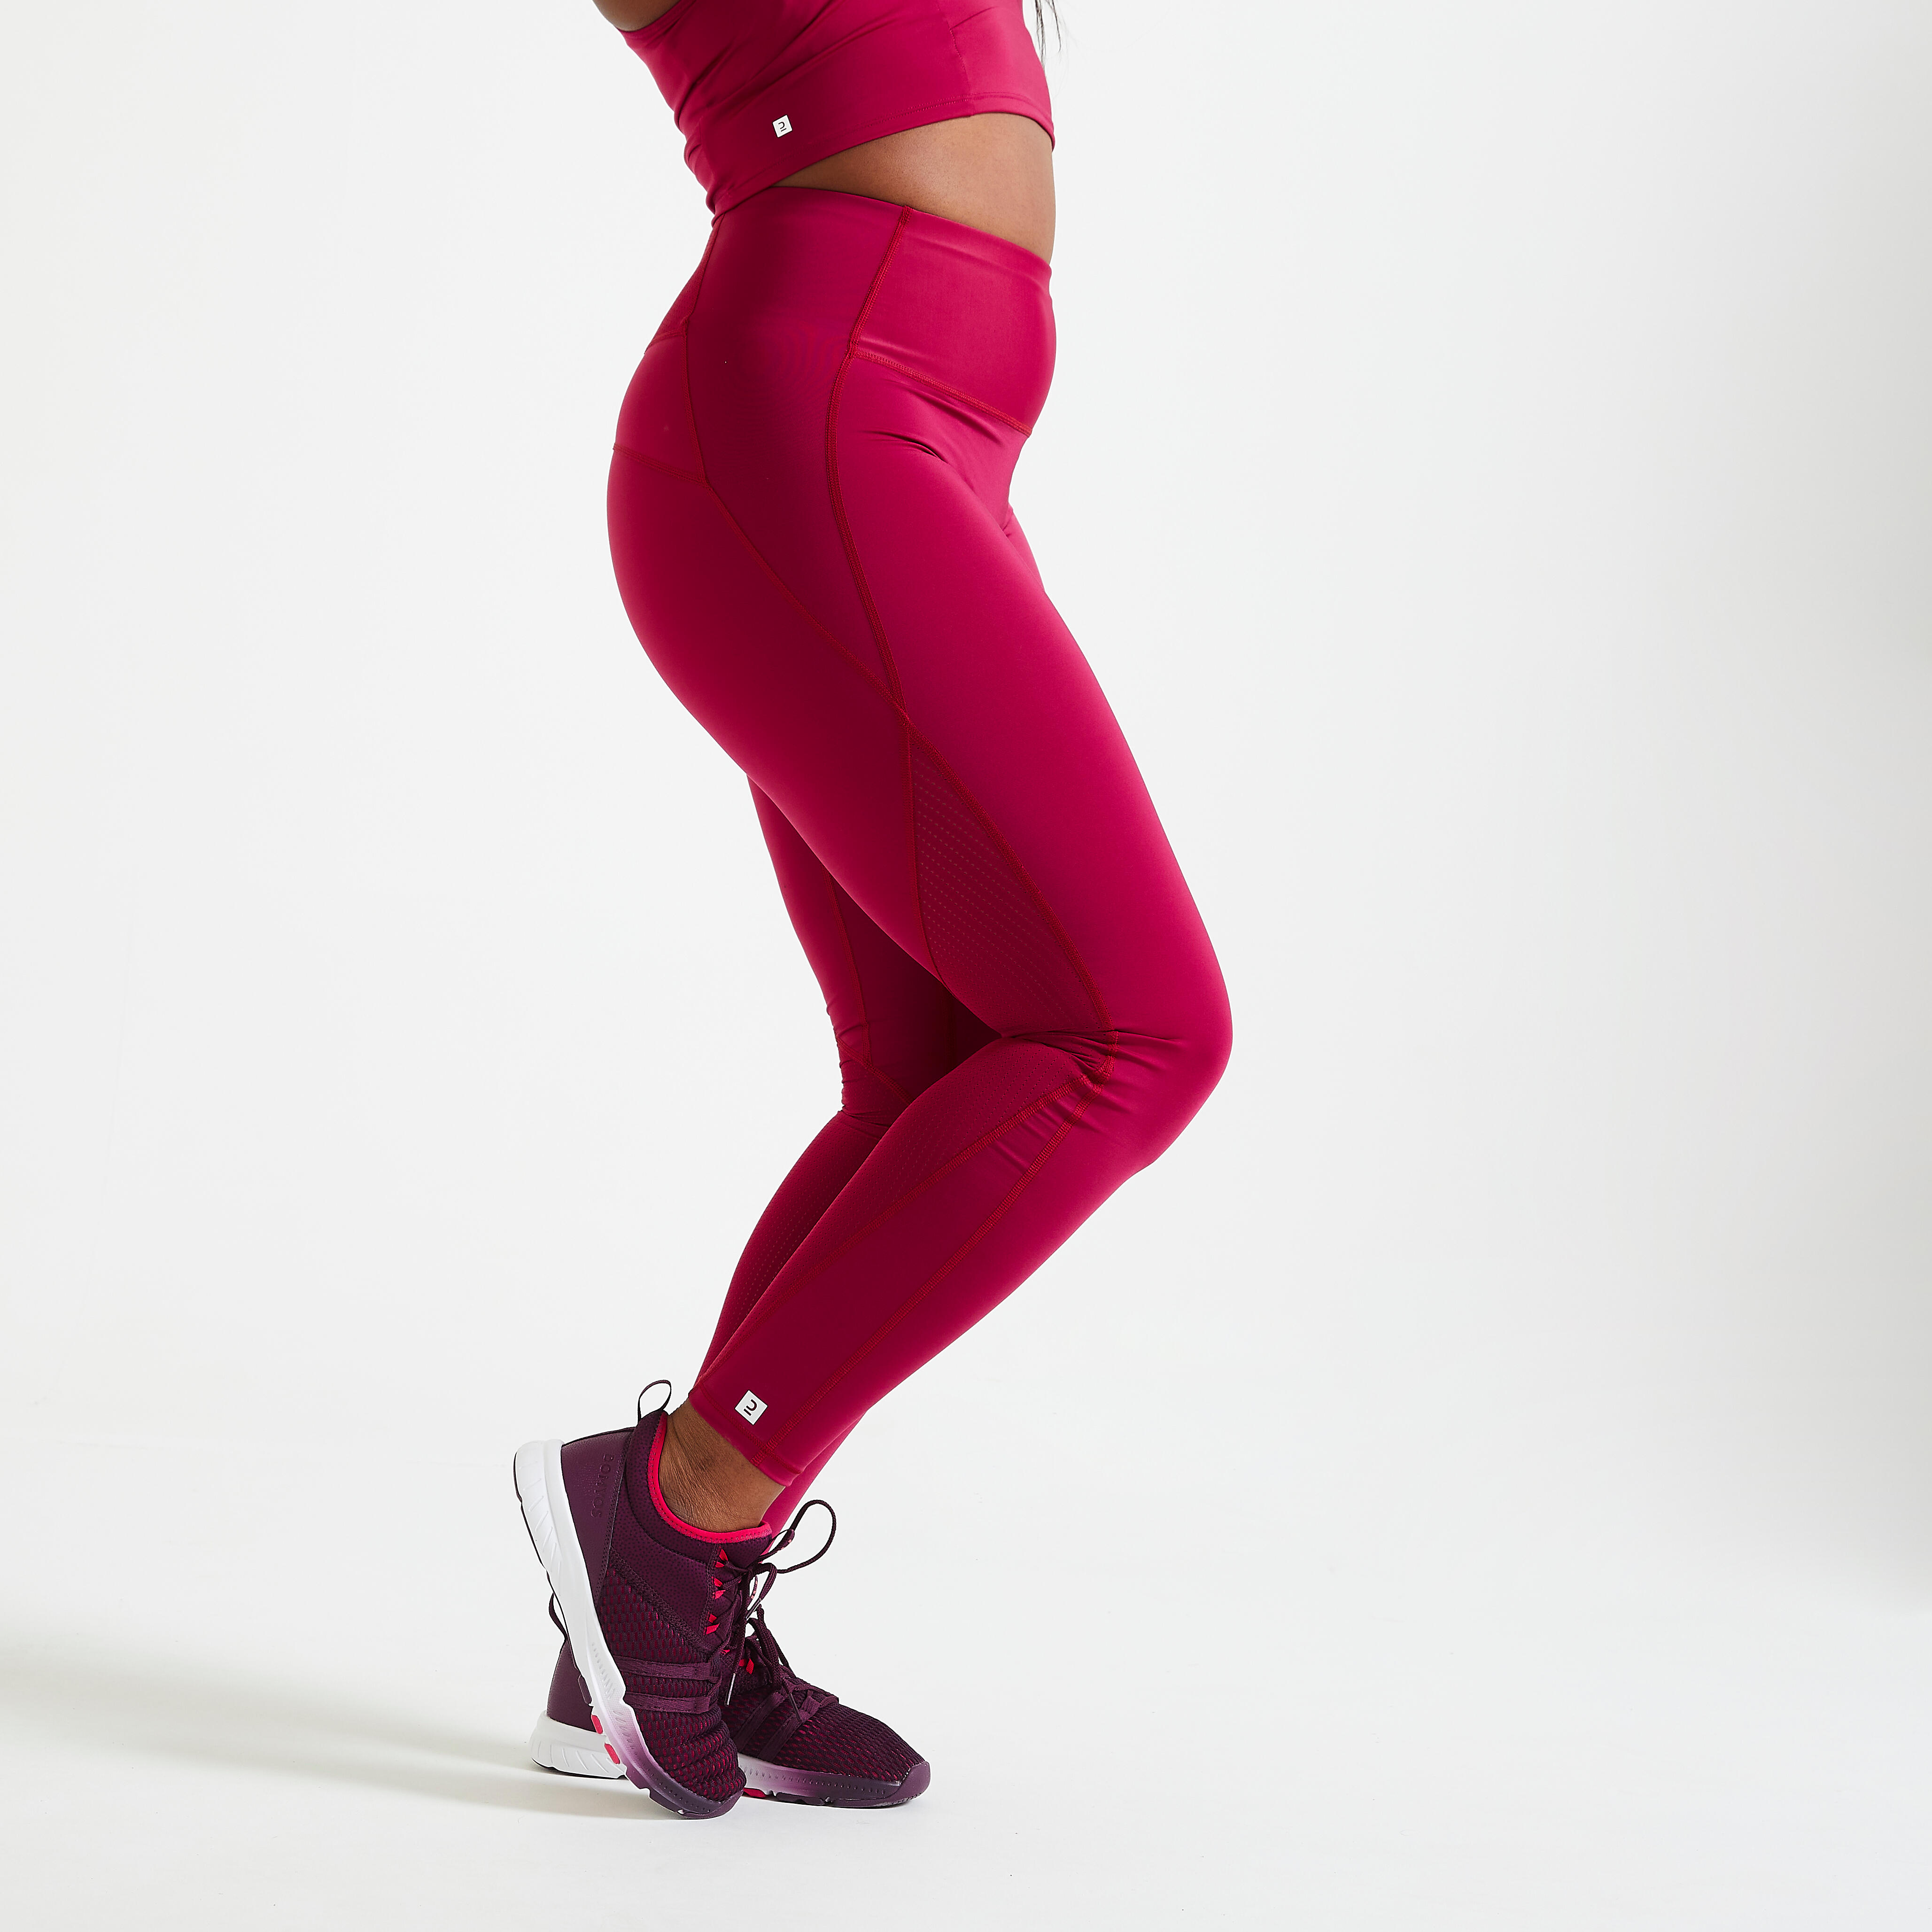 Buy Workout Leggings | Back Zipper Pocket | Premum Stretch Fabric (S,  Maroon) at Amazon.in